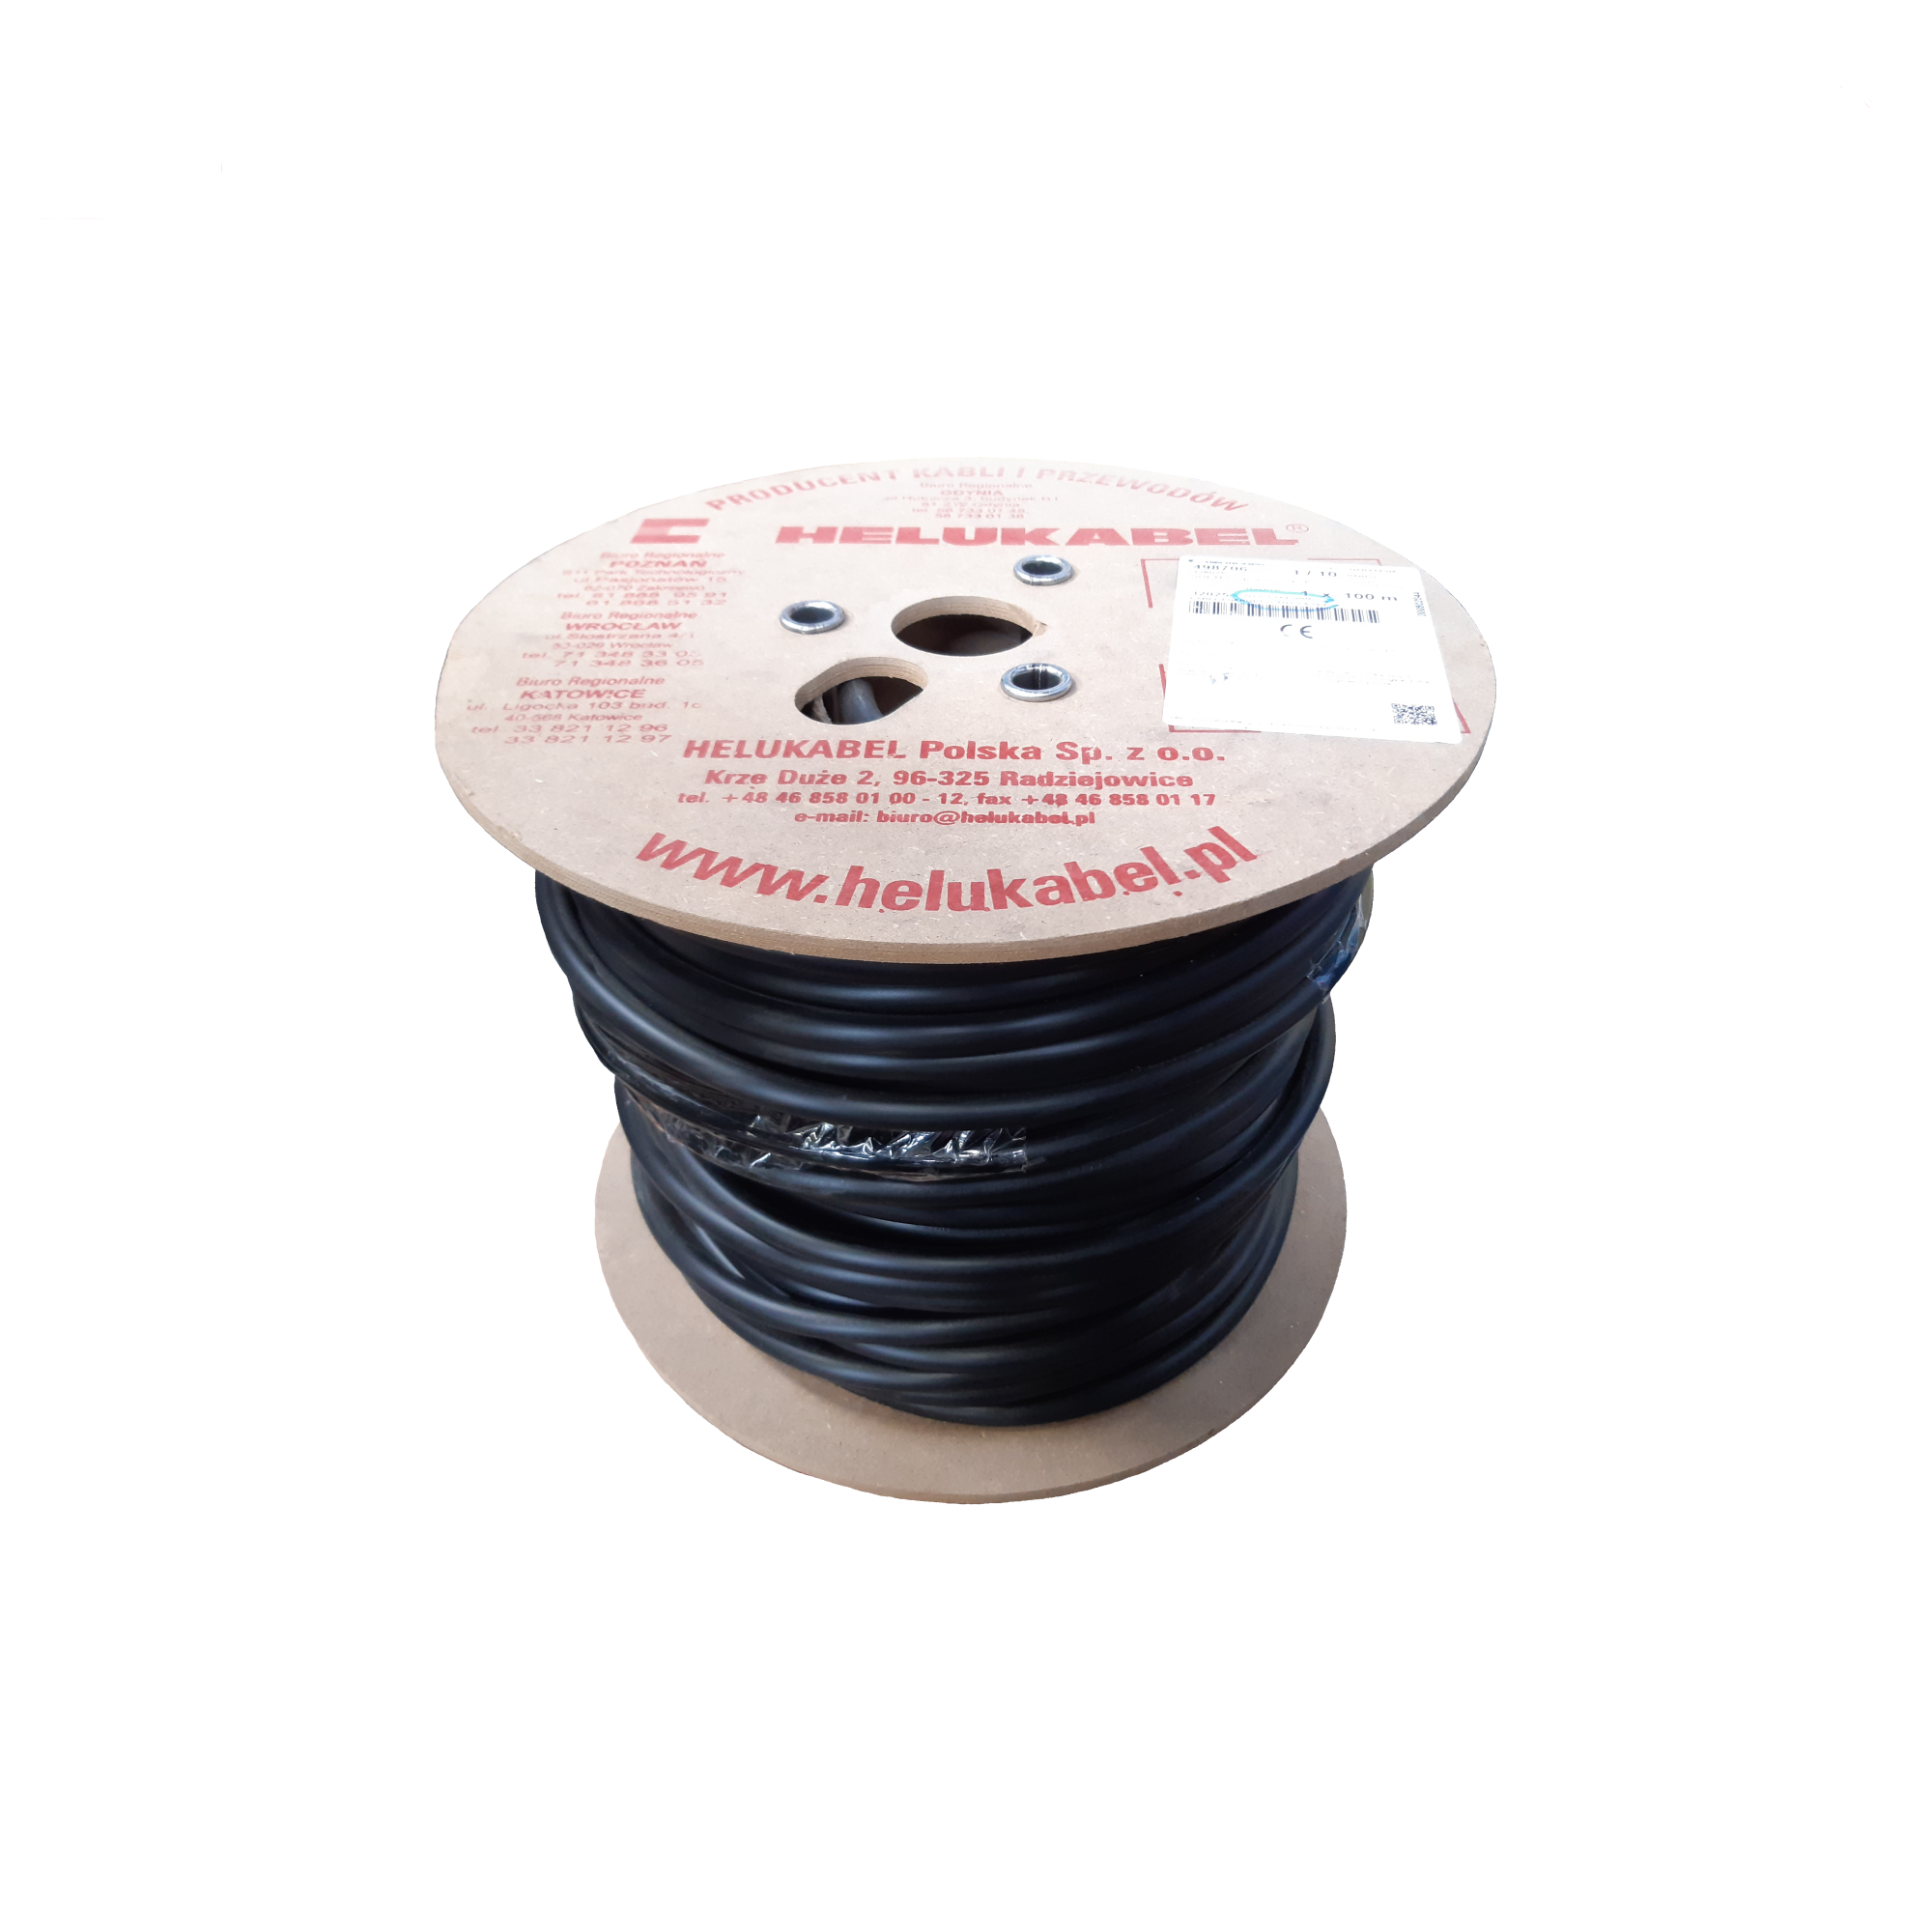 Electrical cable 5x6 mm2 0,6/1 kV 100 m